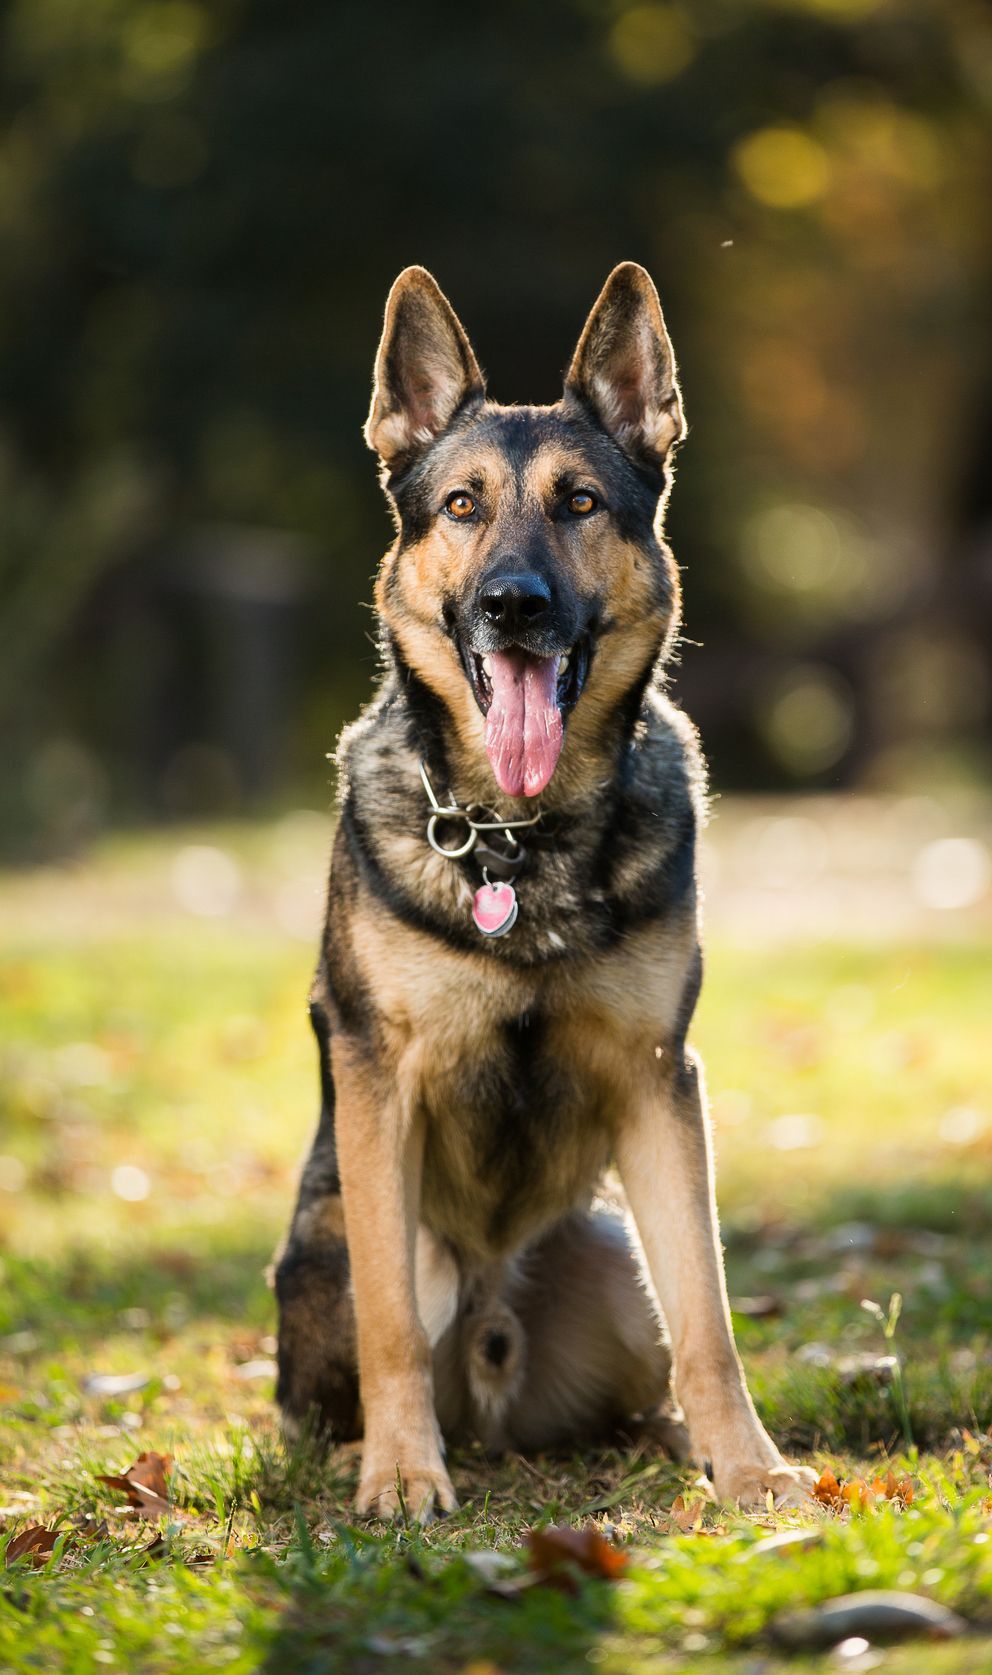 15 Most Loyal Dog Breeds - Loyal and Protective Dogs